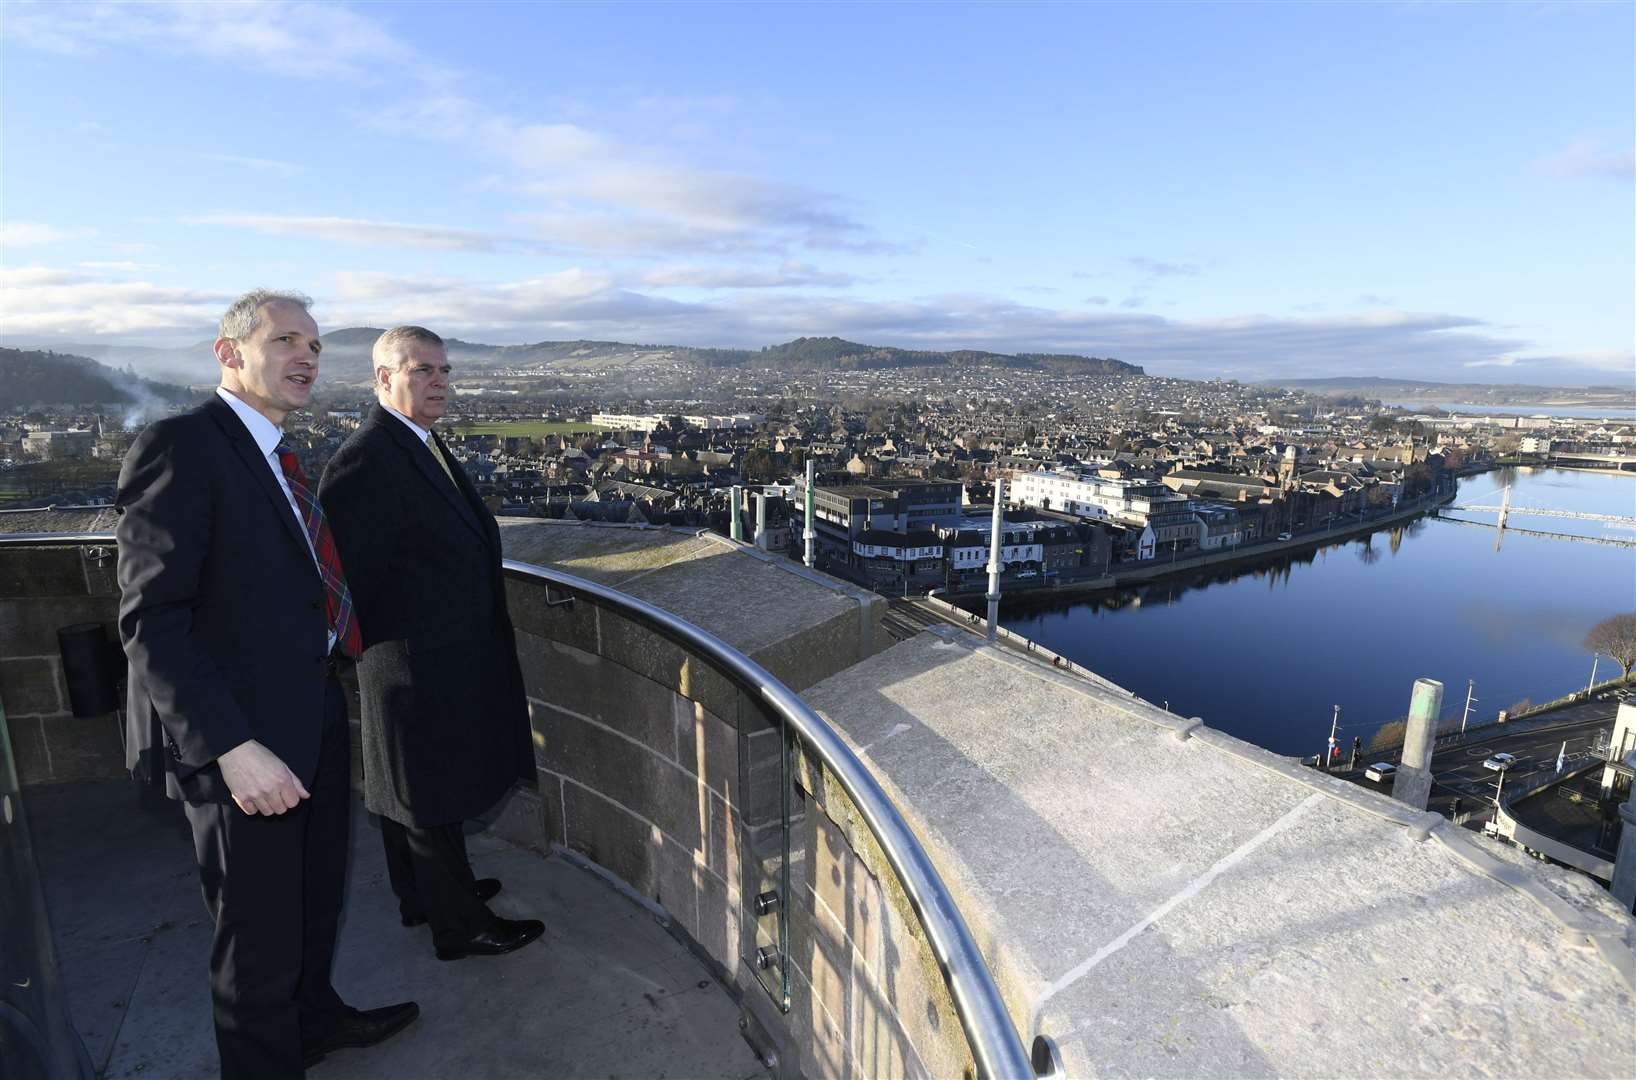 HRH Prince Andrew at Inverness Castle, during his visit to the city in December 2016, when he also visited Highland Hospice's new inpatient unit.